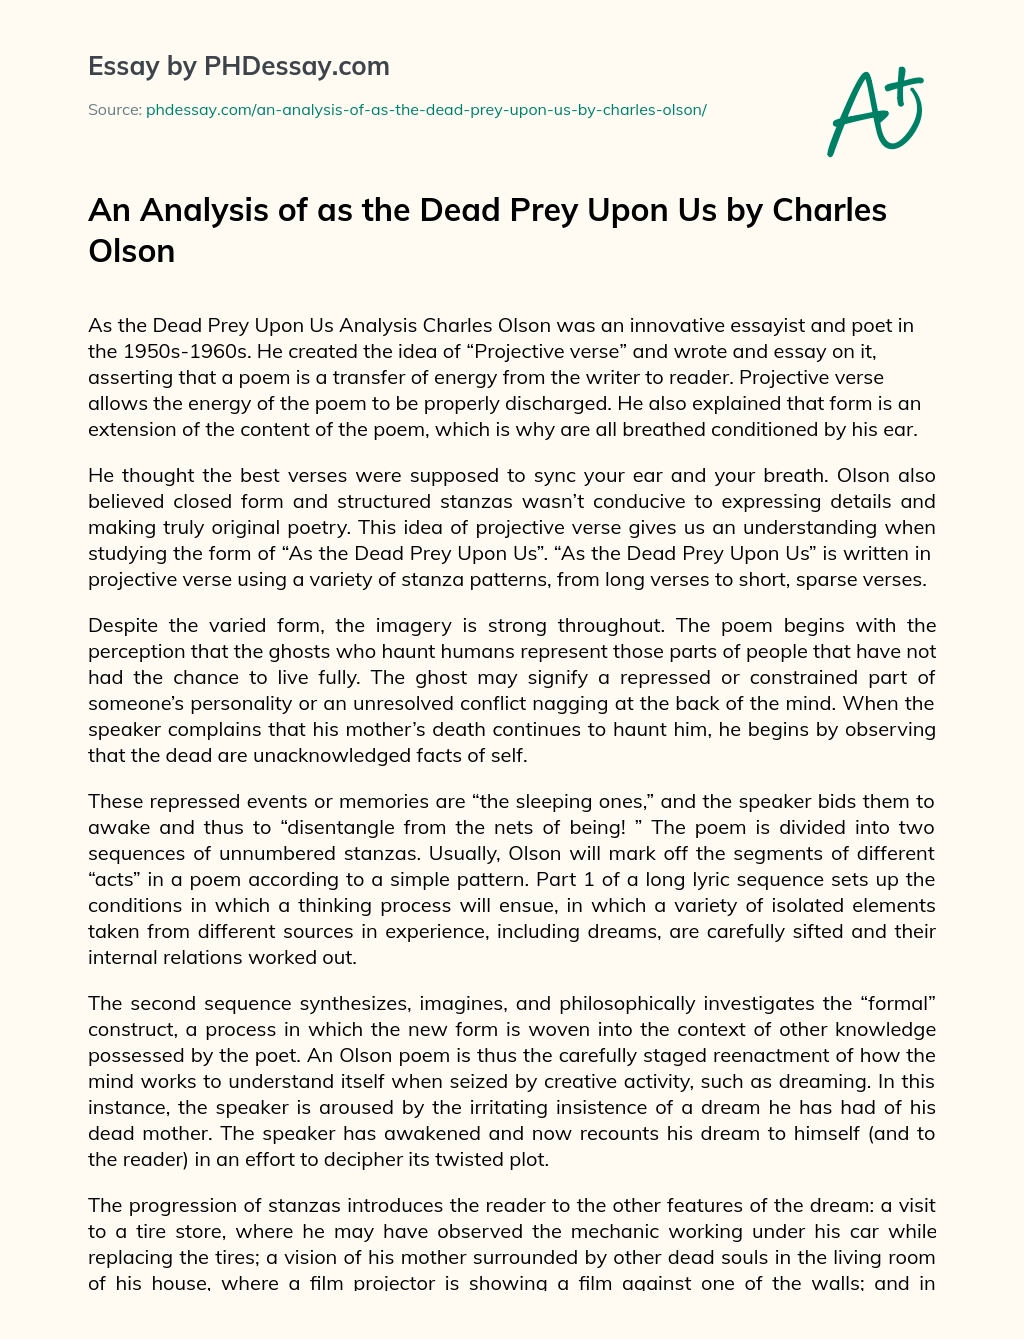 An Analysis of as the Dead Prey Upon Us by Charles Olson essay